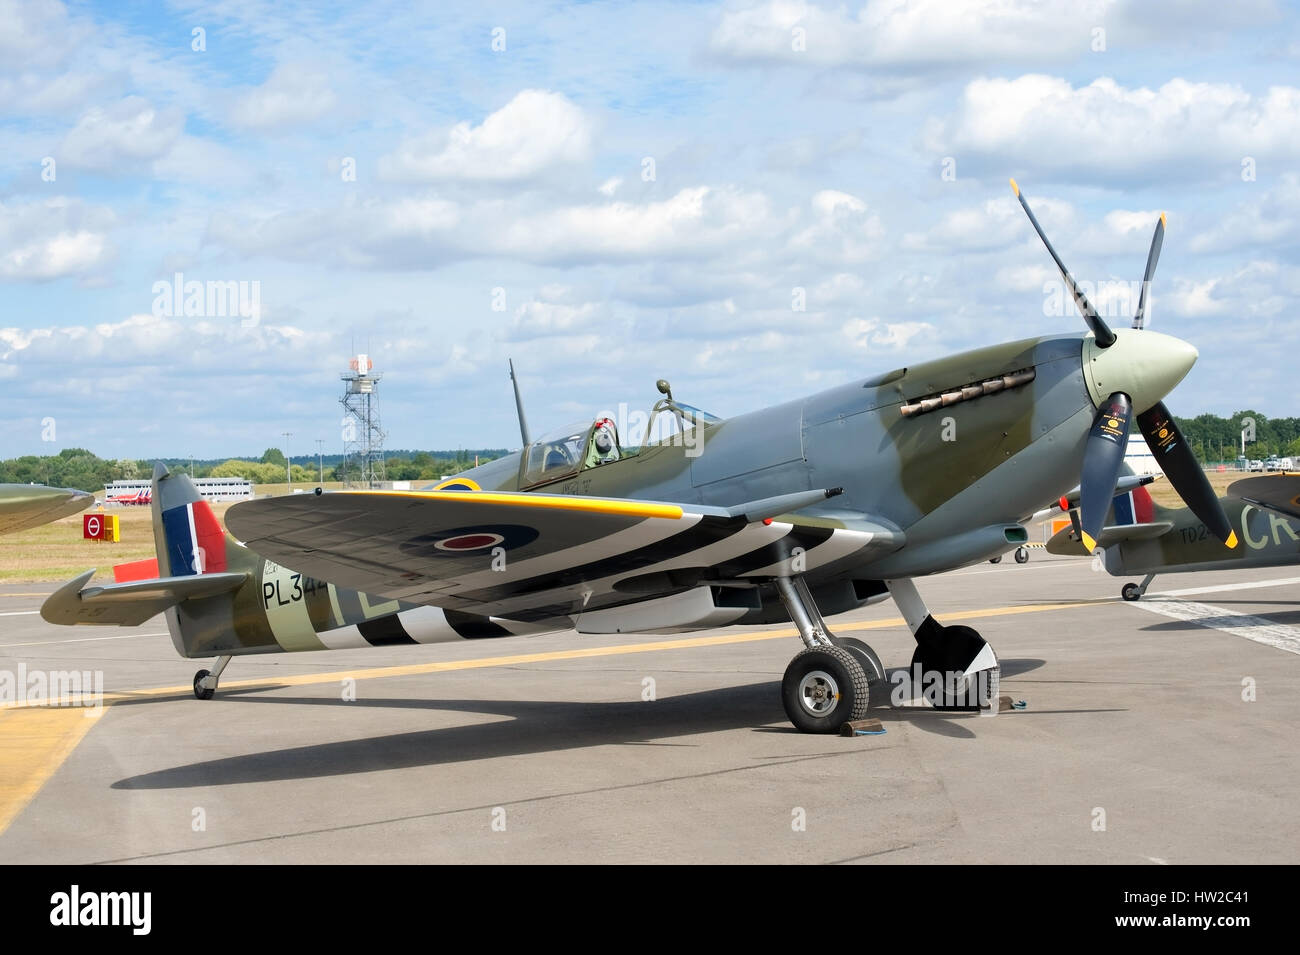 A beautifully restored WW2 Supermarine Spitfire on public display at the Farnborough Airshow, UK Stock Photo